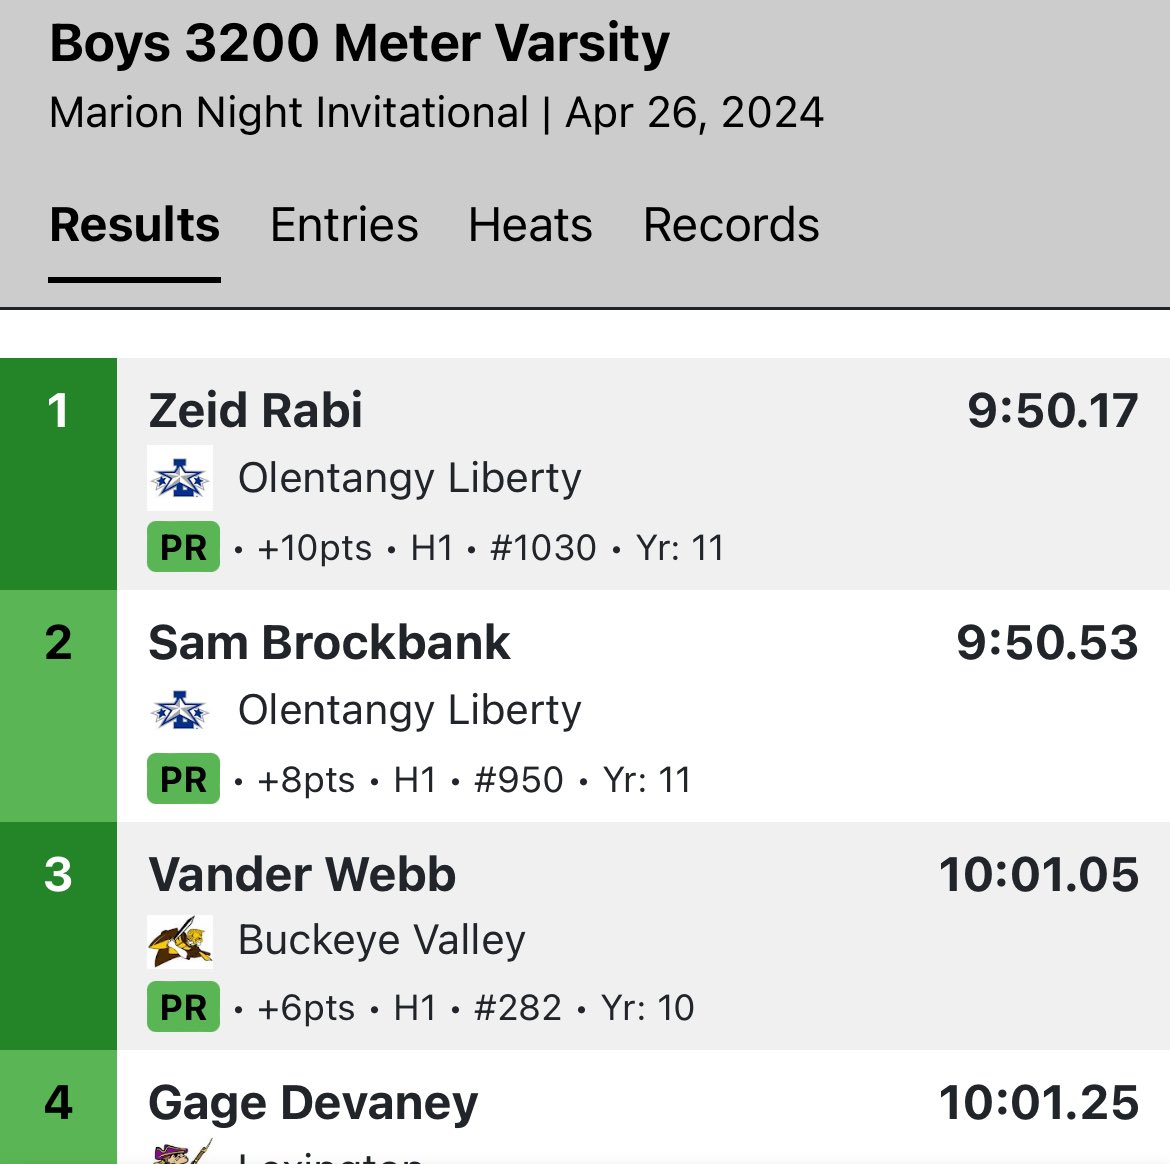 A big 18pts in the 3200 by @zrabi419 & Sam Brockbank puts the team in striking distance! @BradWiemels #connect #compete